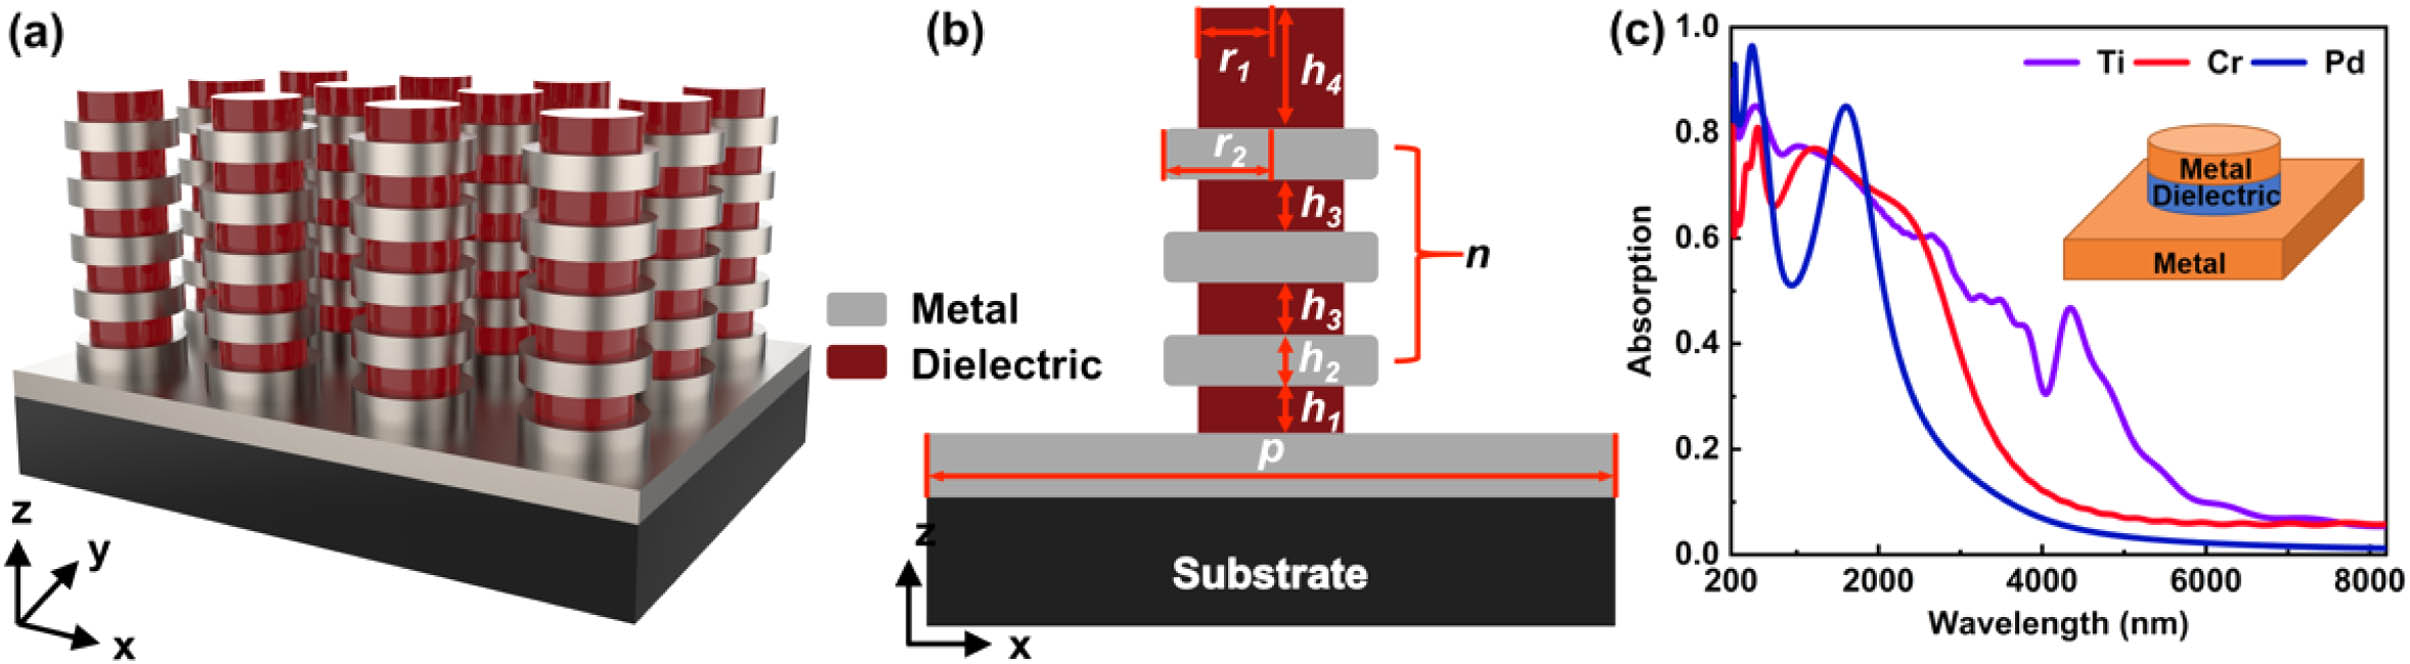 Ultra-broadband plasmonic metamaterial absorber. (a) 3D schematic of the absorber. (b) Front view of the unit cell of the absorber. (c) Typical metamaterial absorber with sandwiched MDM configuration and obtained absorption spectra. The geometric parameters are consistent with model 1. The period of the structure is 220 nm, thickness of the substrate is 300 nm, radius of metal and dielectric is 100 nm, and heights of metal and dielectric are 45 and 25 nm, respectively.